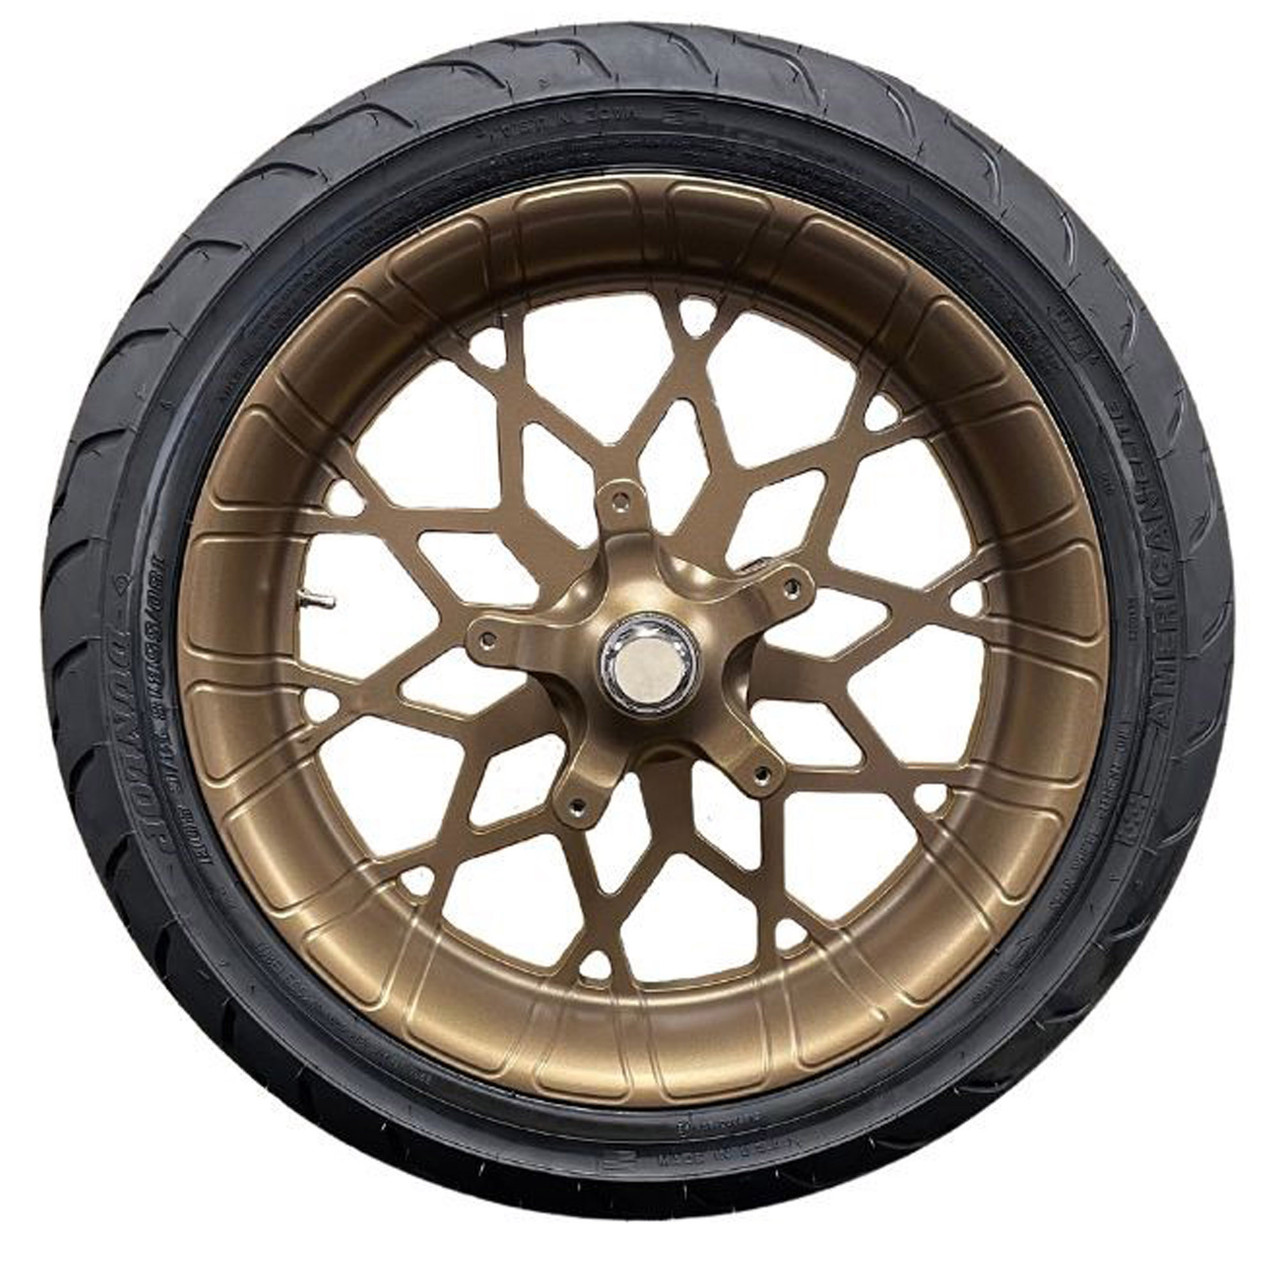 Indian Chieftain Motorcycle Wheels